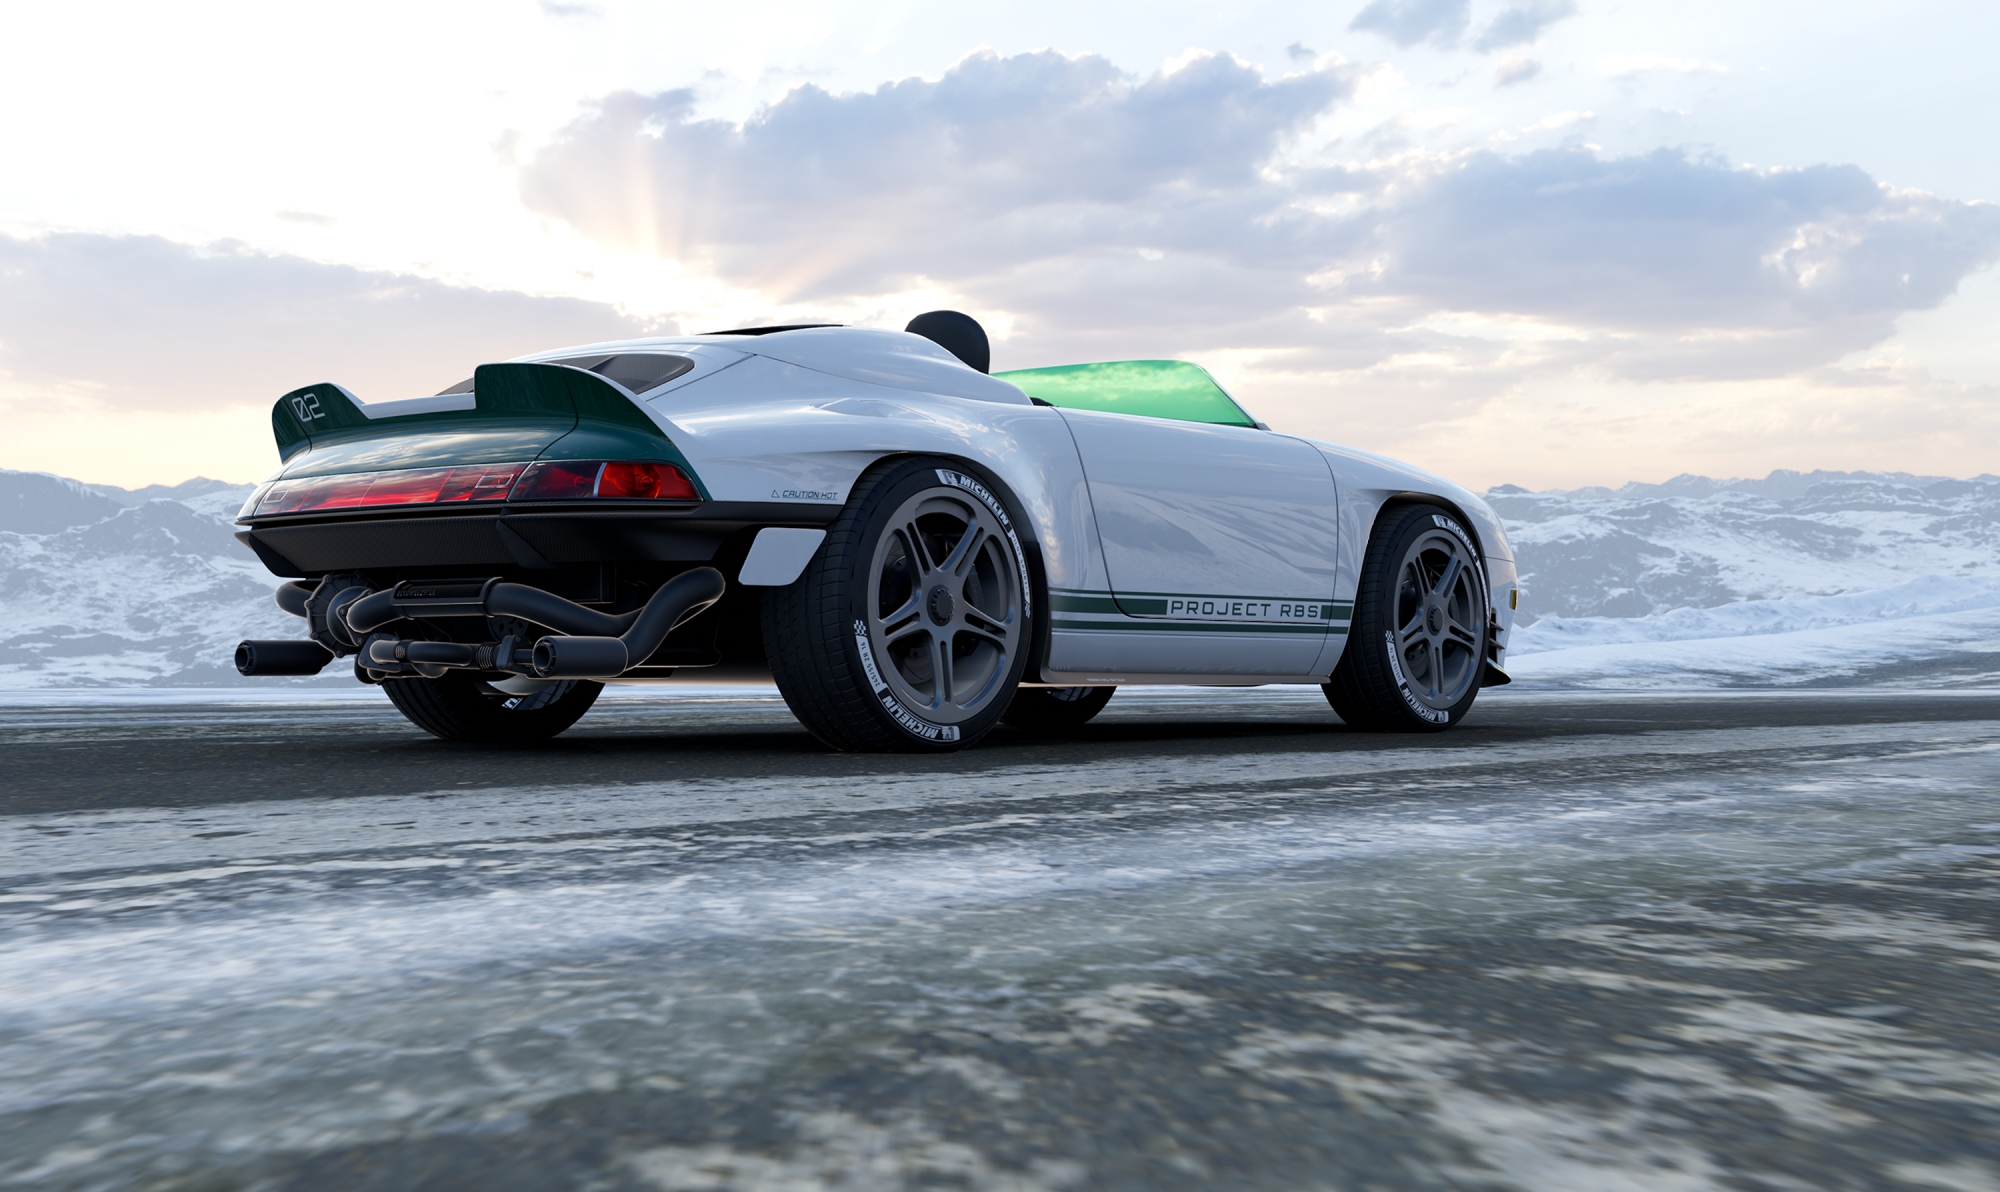 Rendering-of-a-green-and-white-sports-car-on-the-vereign-road